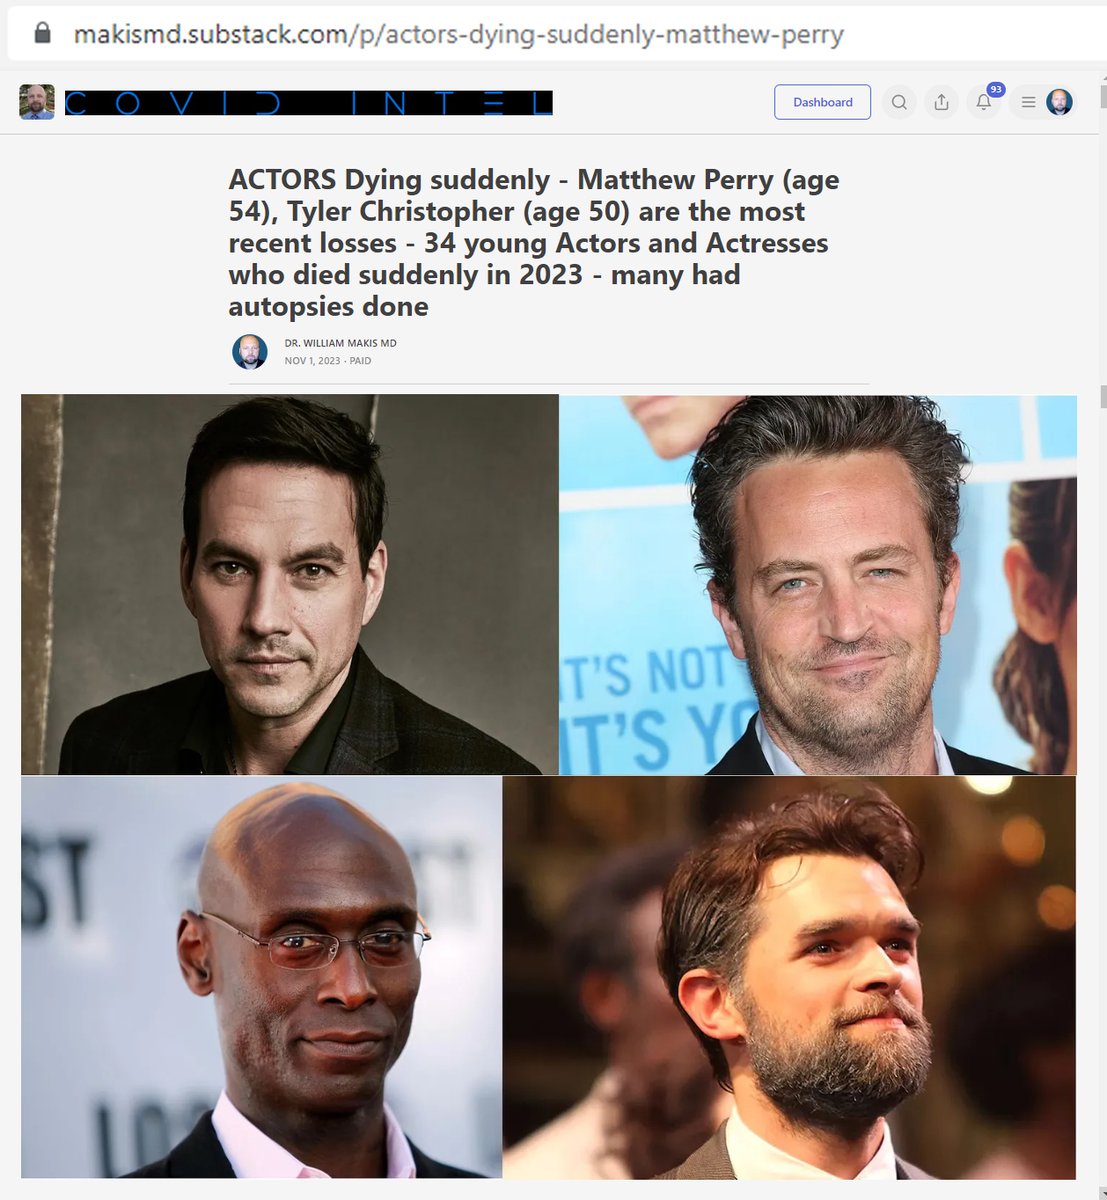 NEW ARTICLE: ACTORS Dying suddenly - Matthew Perry (age 54), Tyler Christopher (age 50) are the most recent losses:

34 young Actors and Actresses who died suddenly in 2023 - many had autopsies done!

Vast majority were forced to take COVID-19 Vaccines to get or keep a job